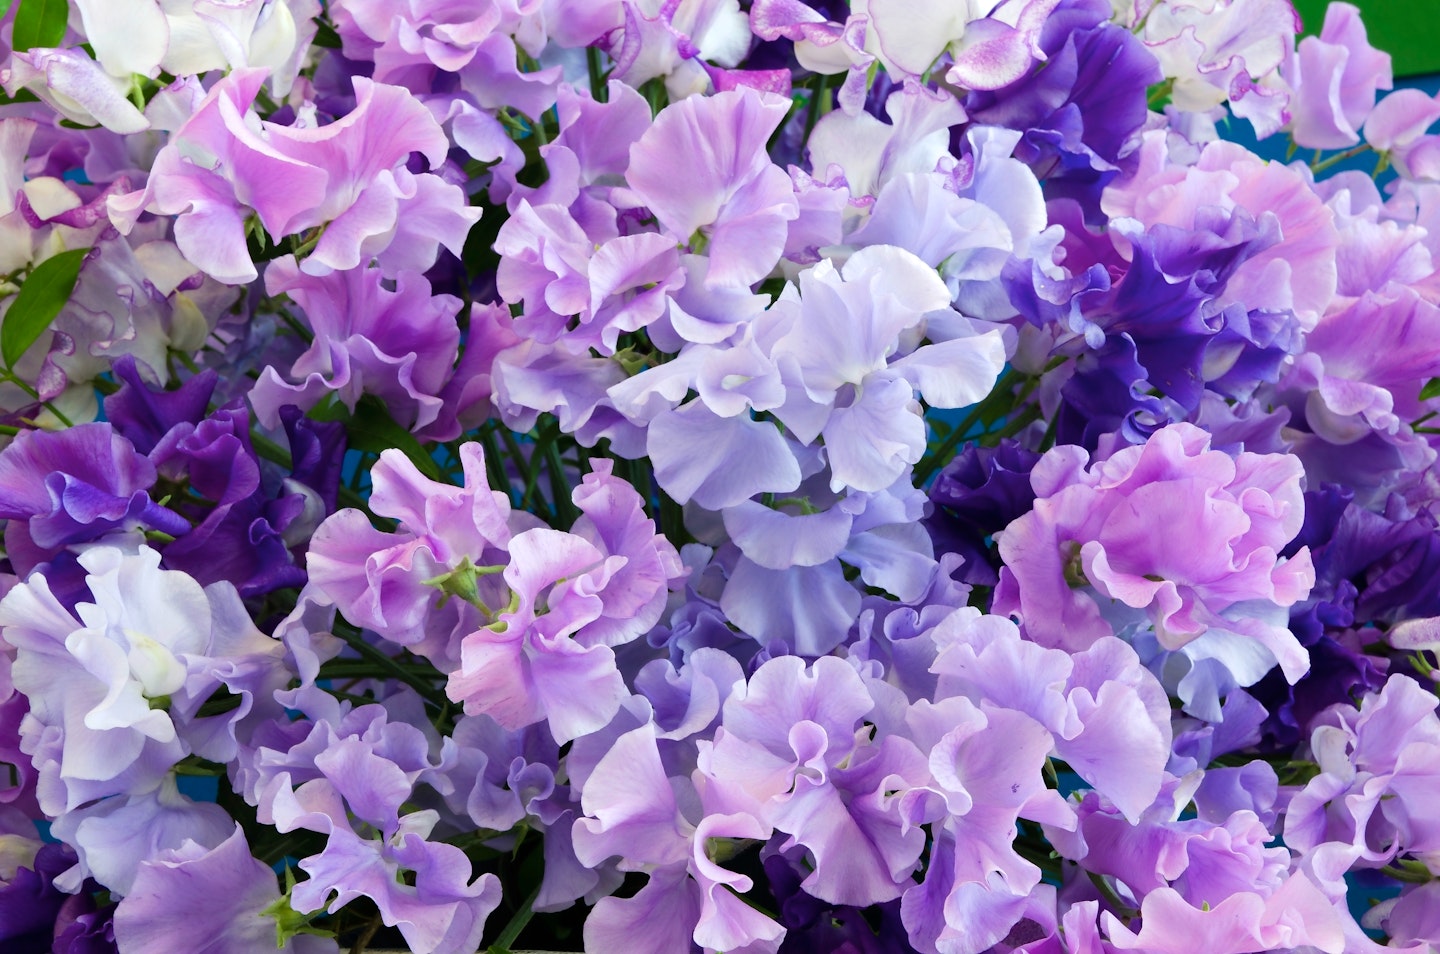 Sweet peas - a cottage garden classic